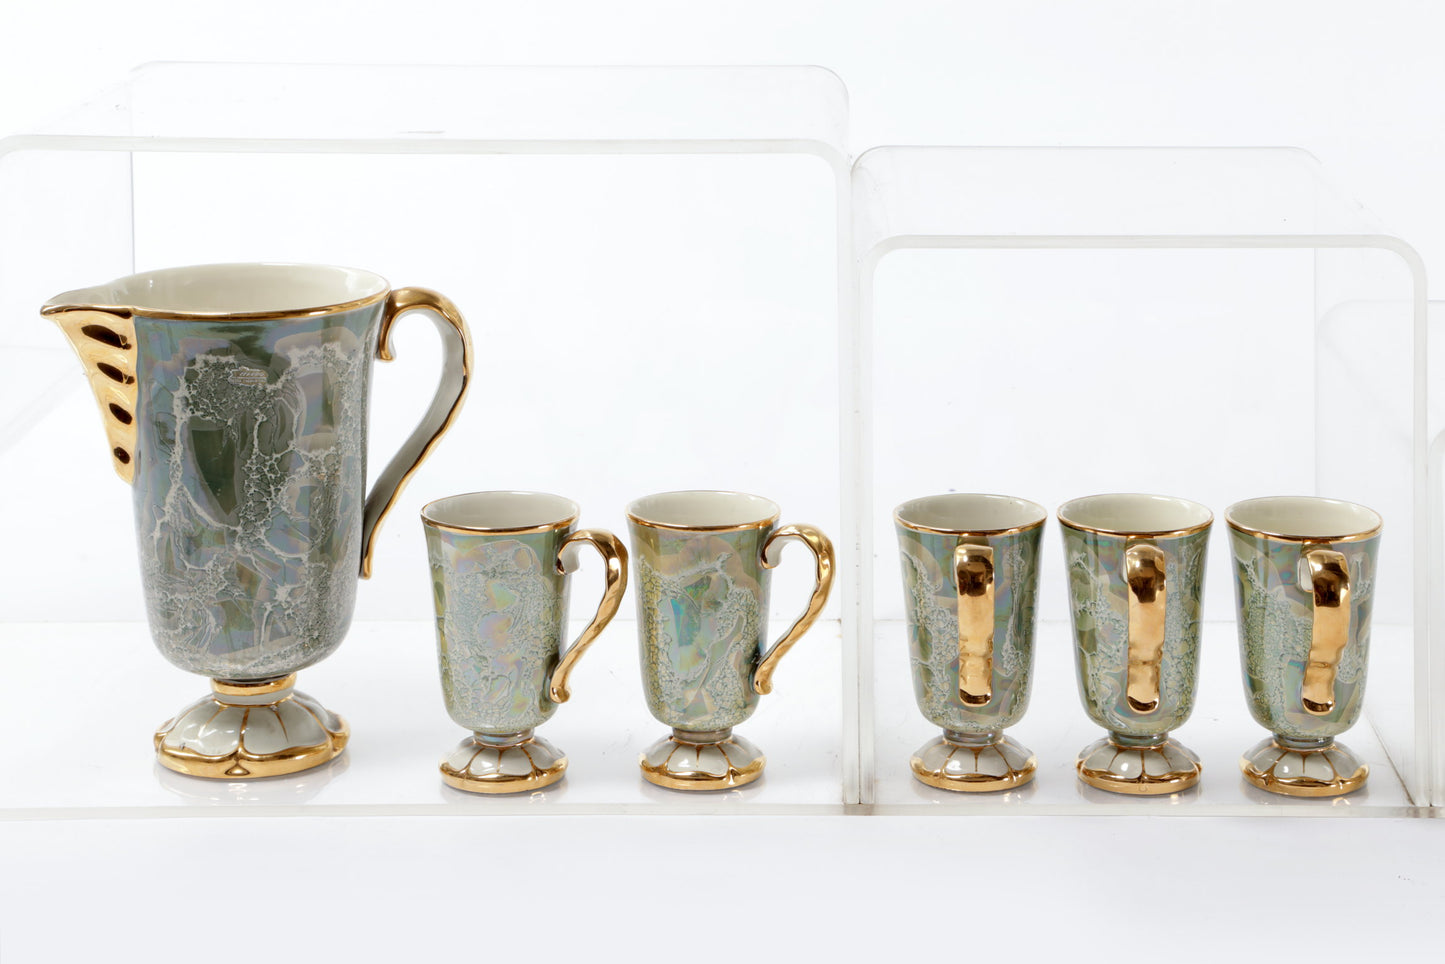 Goblet set with marbled ceramic jug from the 1950s